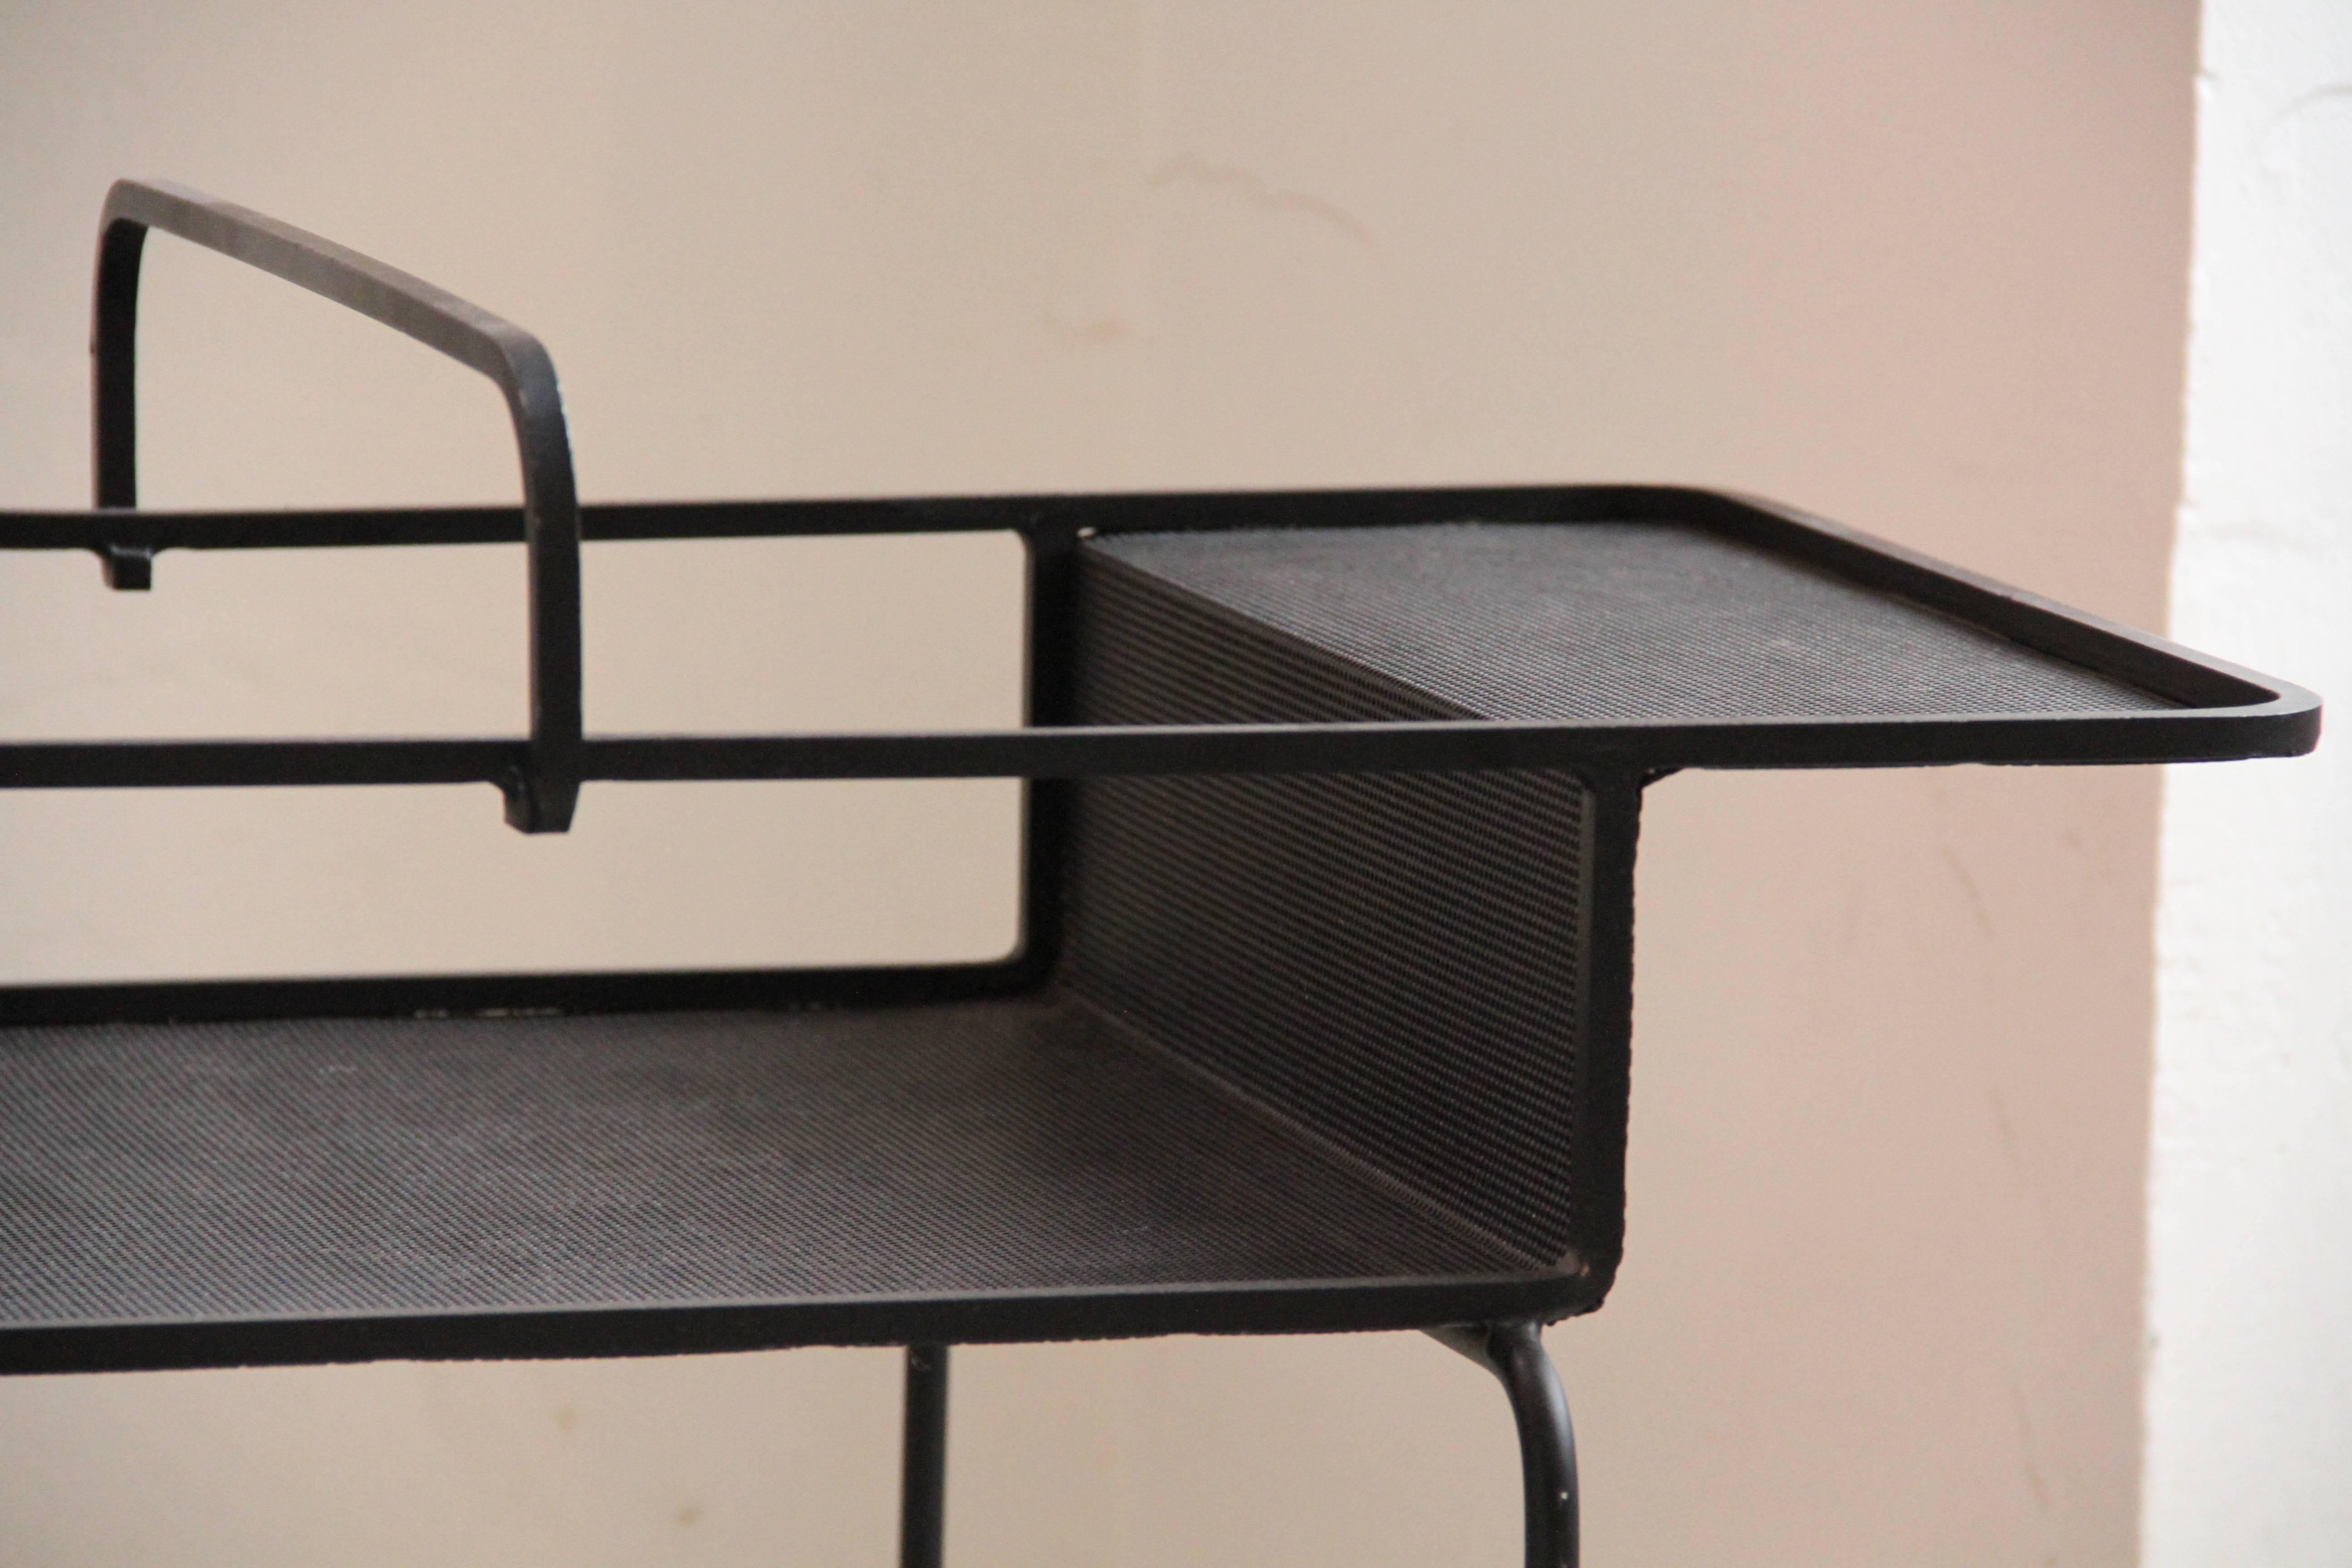 French Table and Magazine rack, designed by Mathieu Mategot in the 50'
Original black lacquered rigitule in good condition with brass feet
